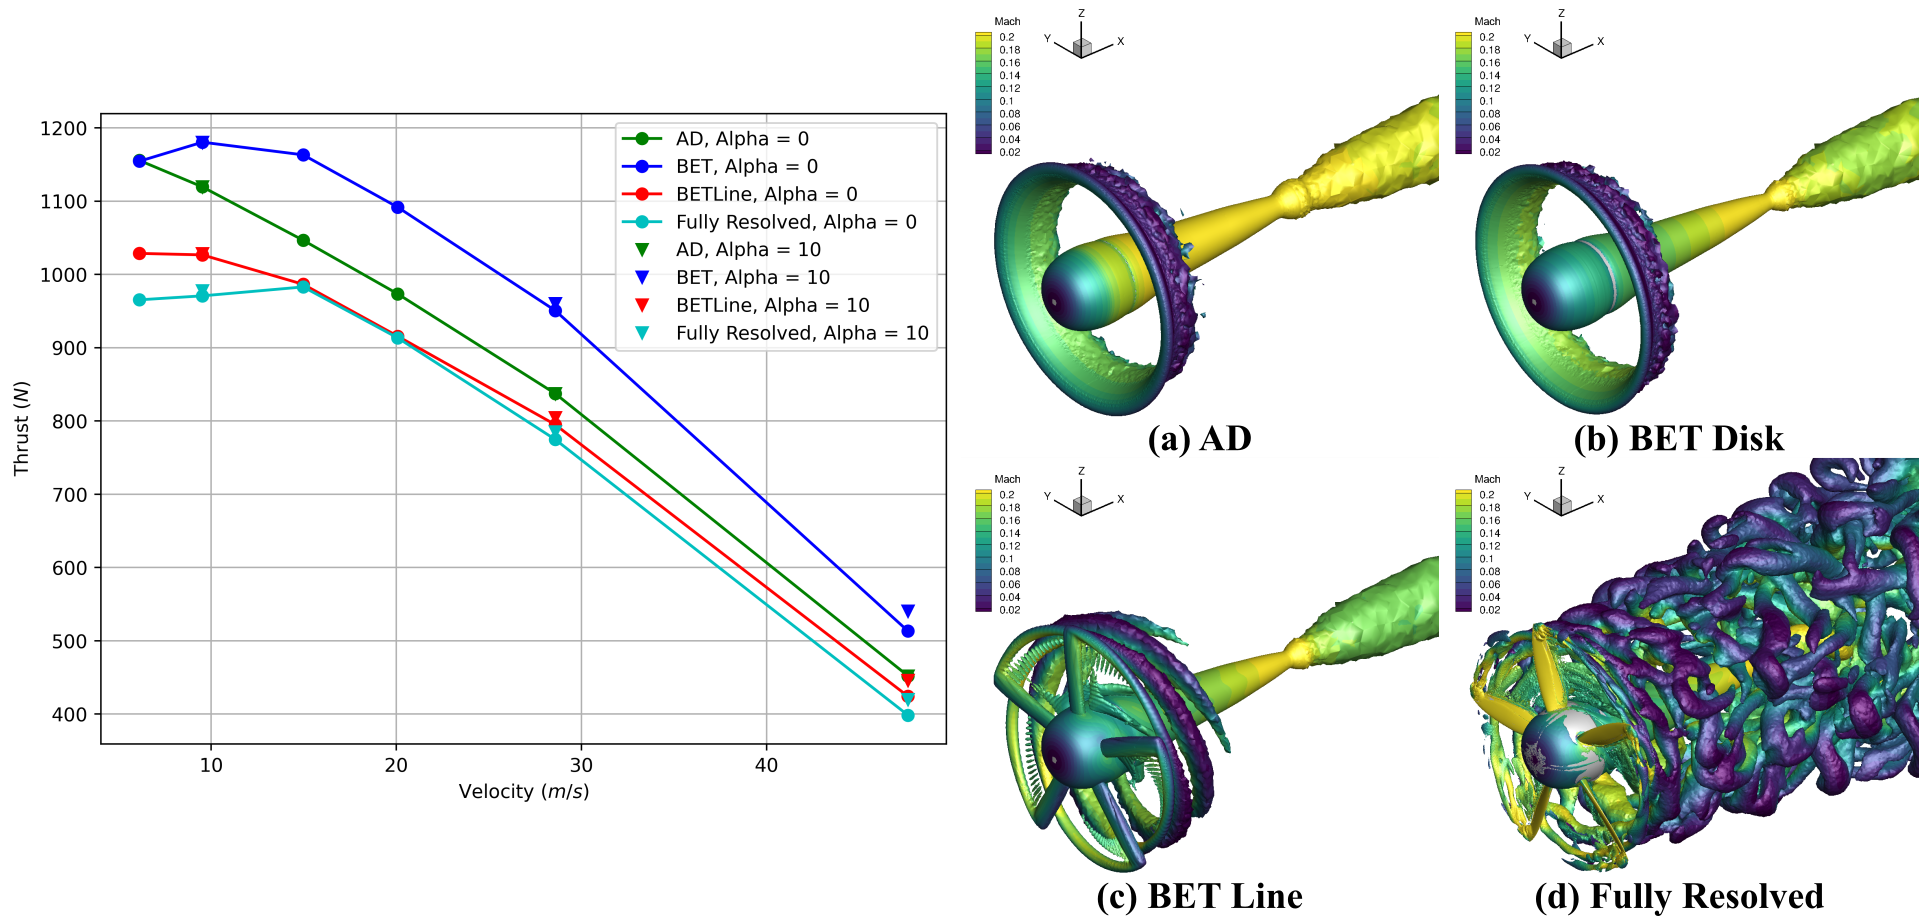 Change in the calculated rotor thrust as a function of the propulsion model, angle of attack, and the freestream velocity